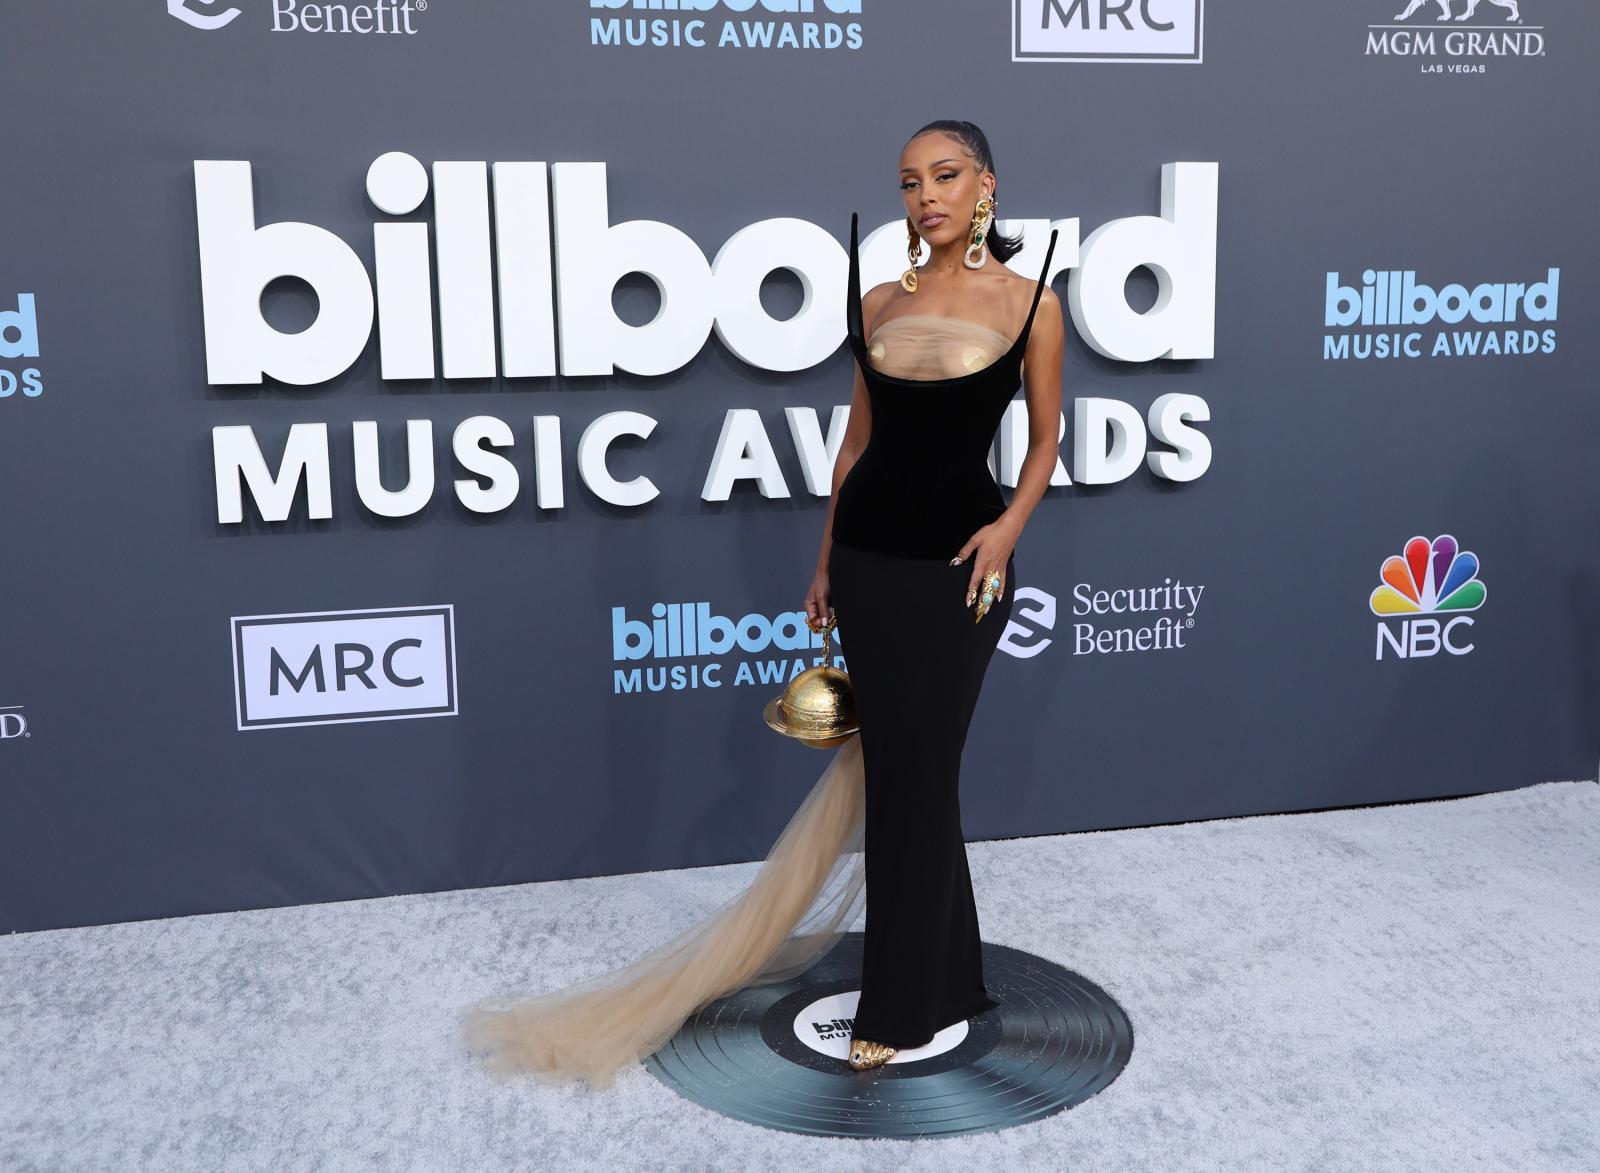 Billboard Music Awards 2022: Four Hottest Red Carpet Looks (And One Bizarre) - image 3